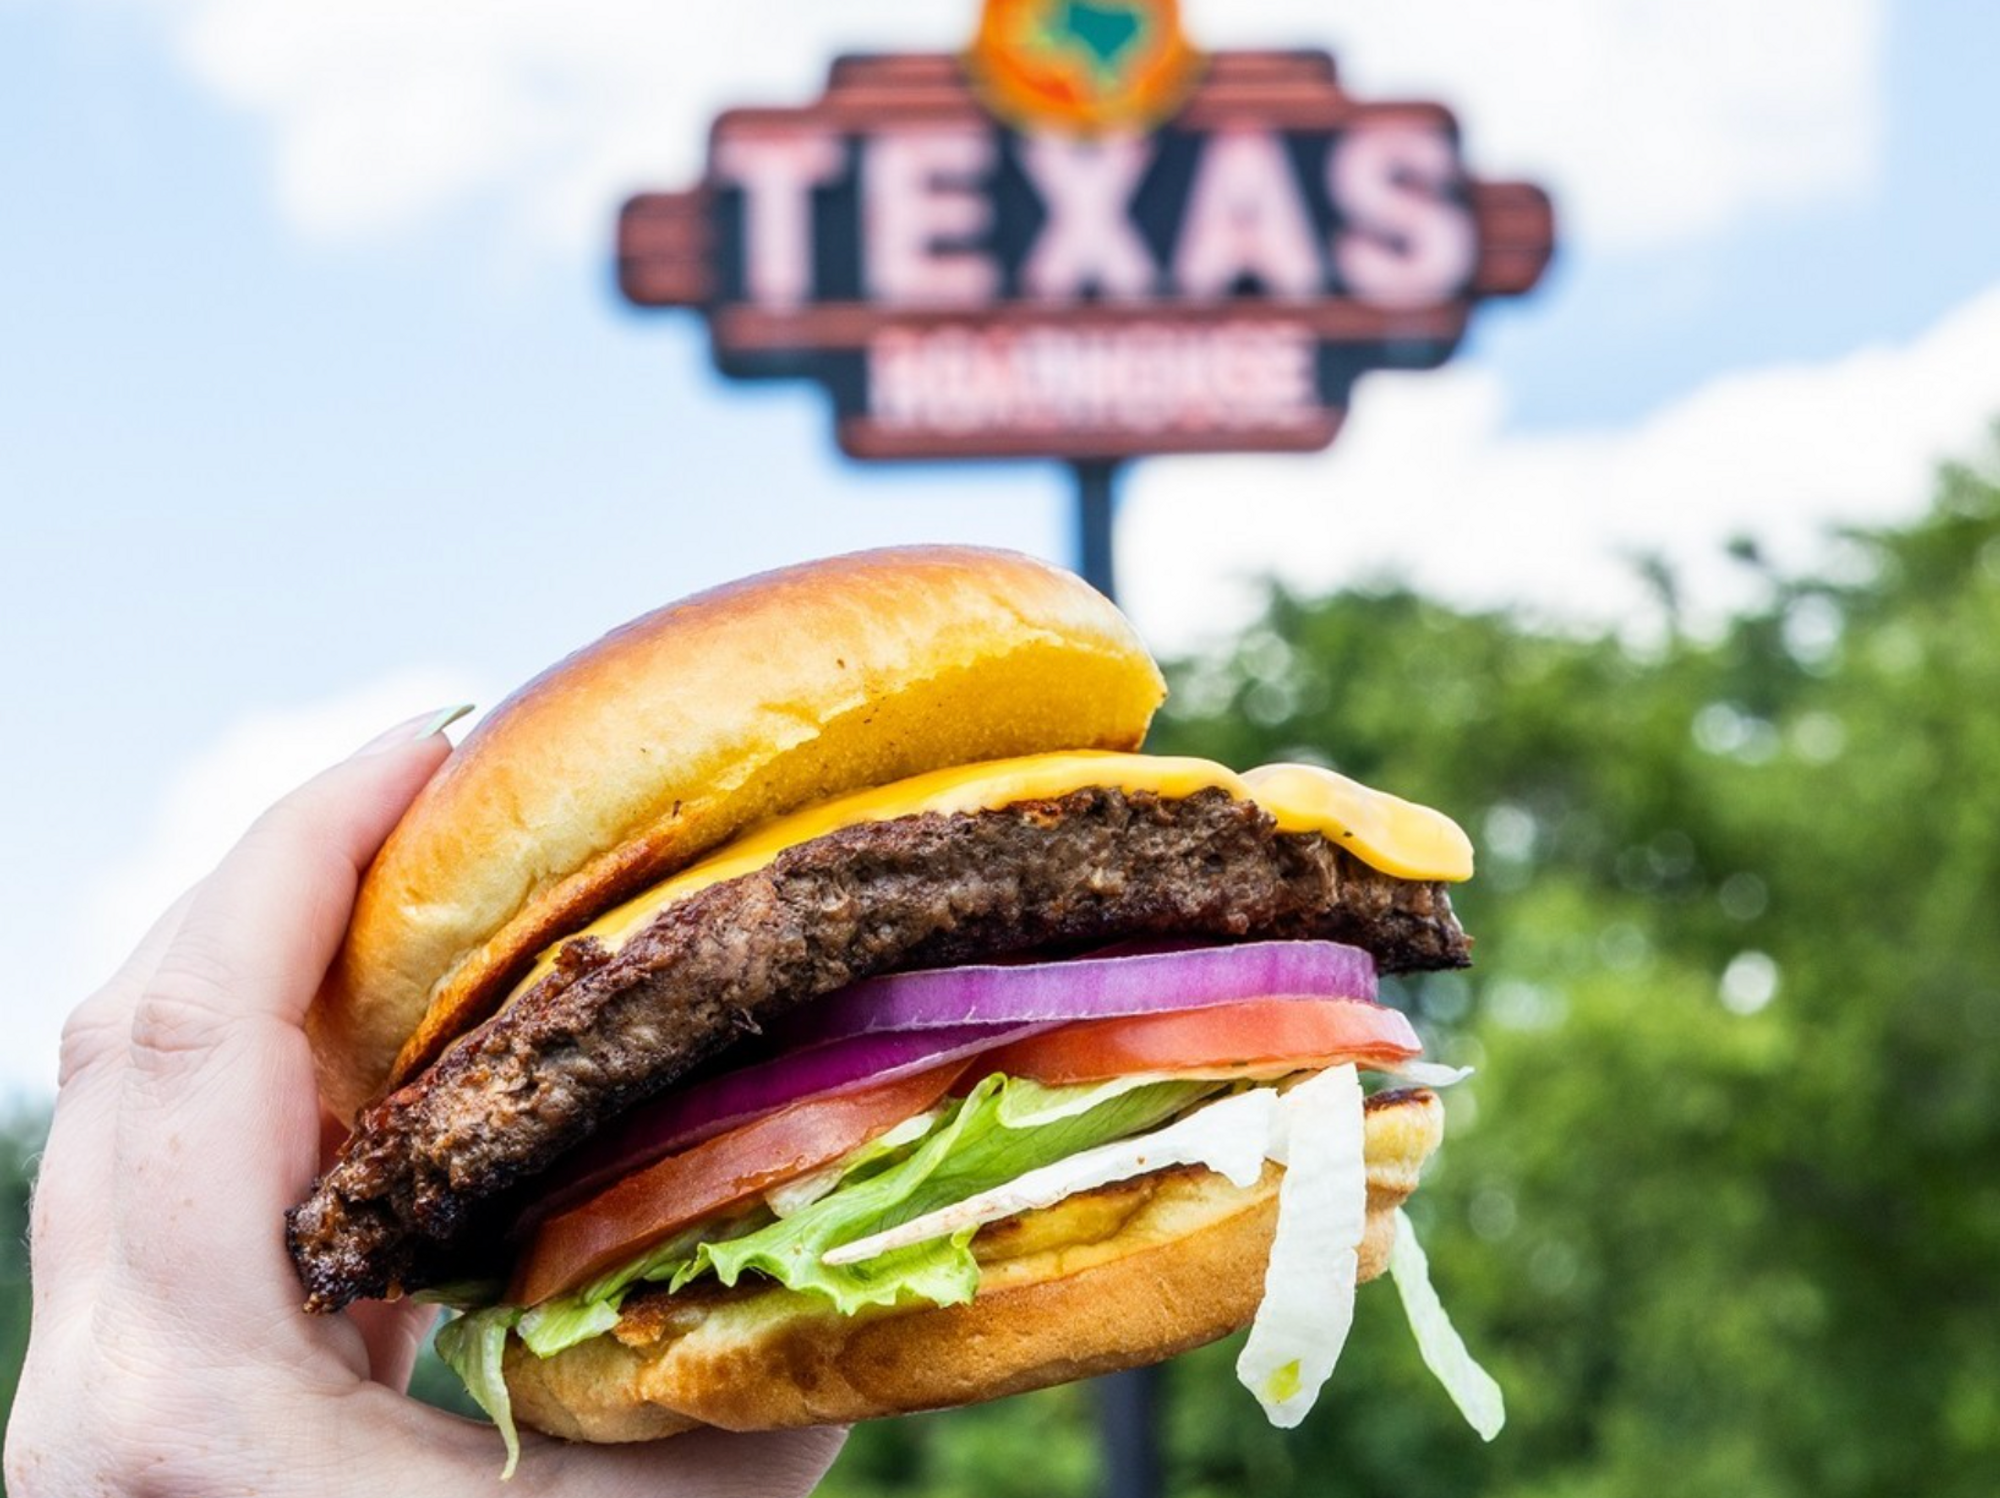 Texas Roadhouse burger and sign